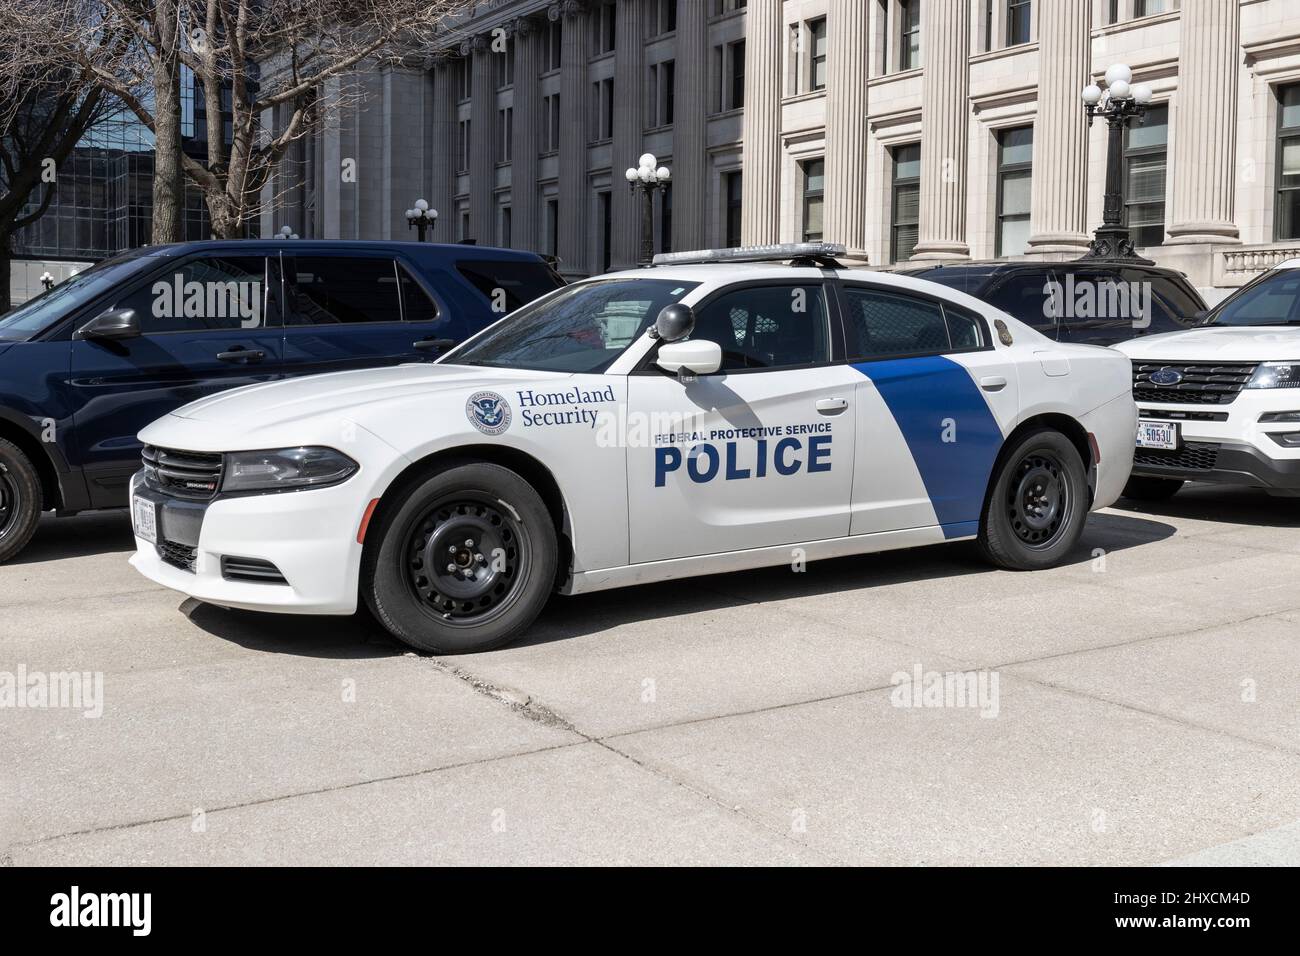 Indianapolis - Circa March 2022: Federal Protective Service Police vehicles. The Federal Protective Service provides security for federally owned buil Stock Photo